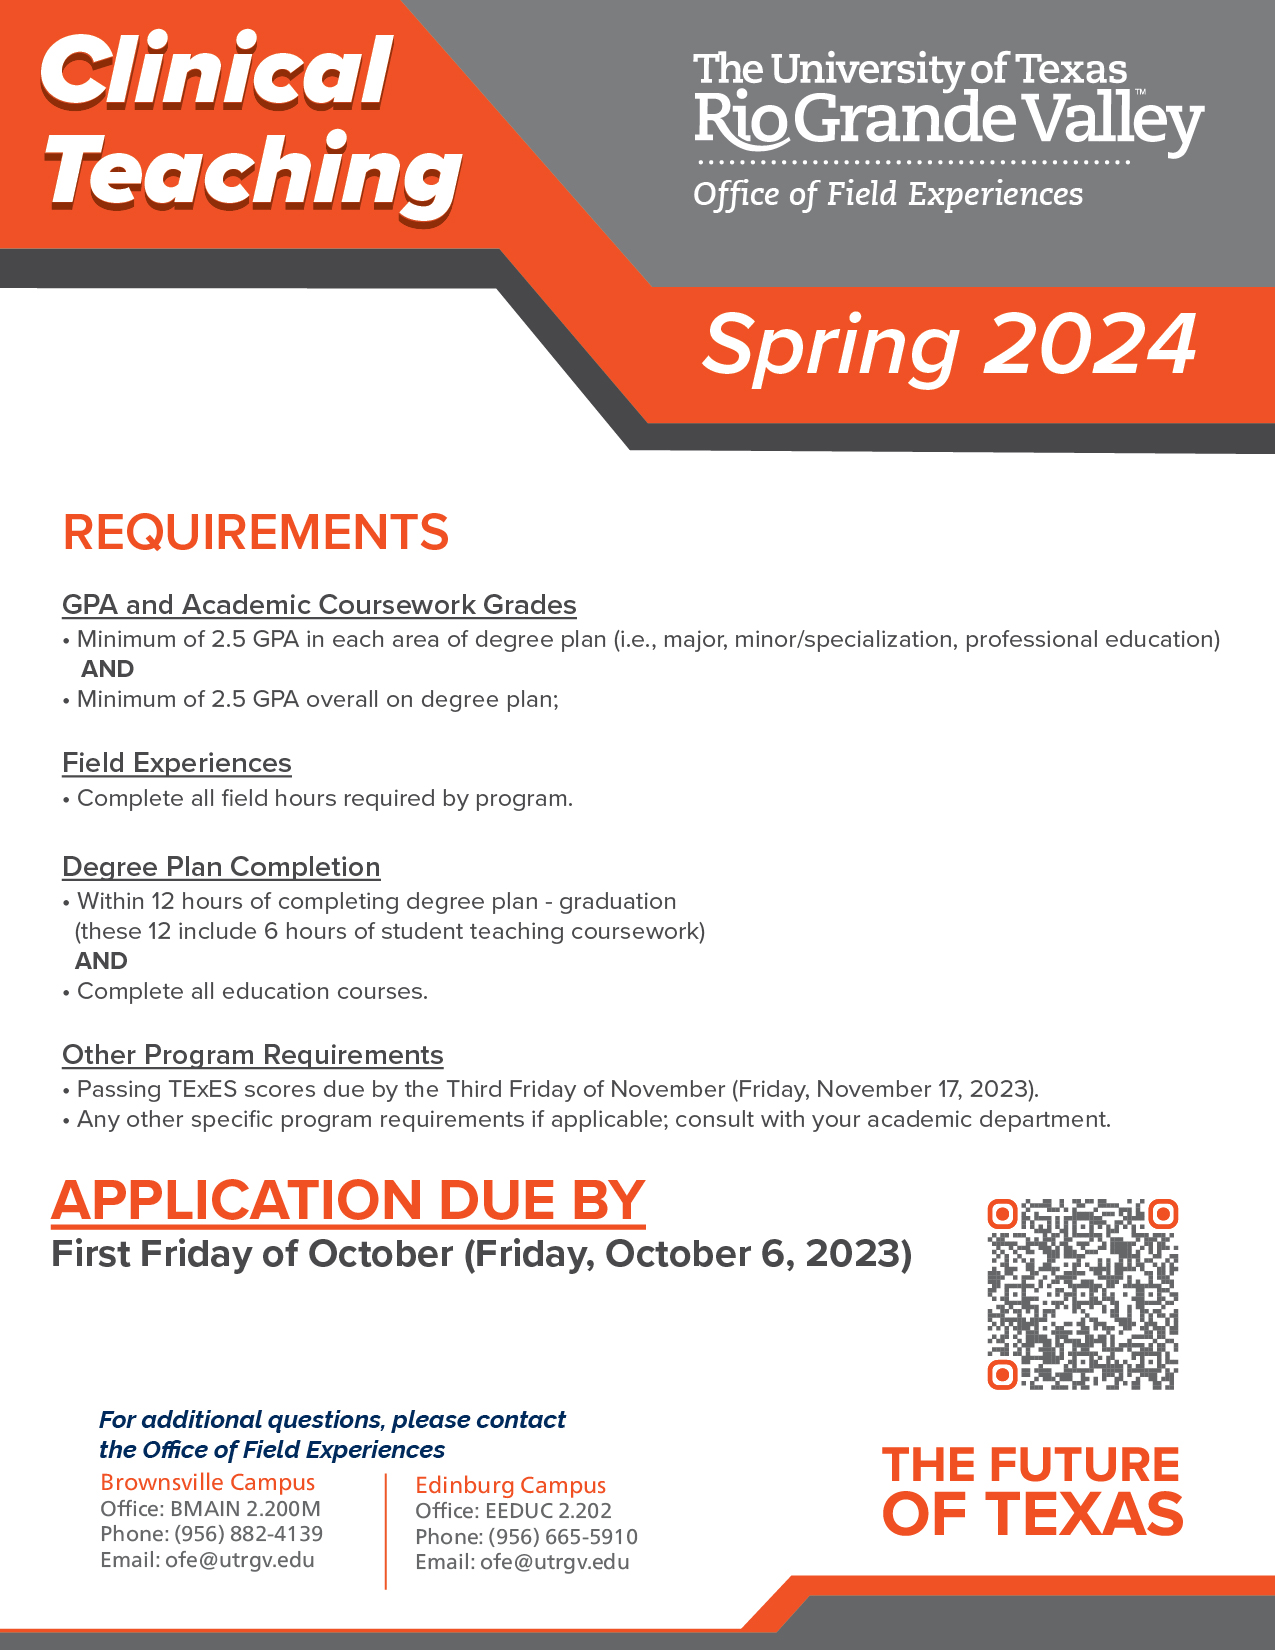 Clinical Teaching Application for Spring 2024